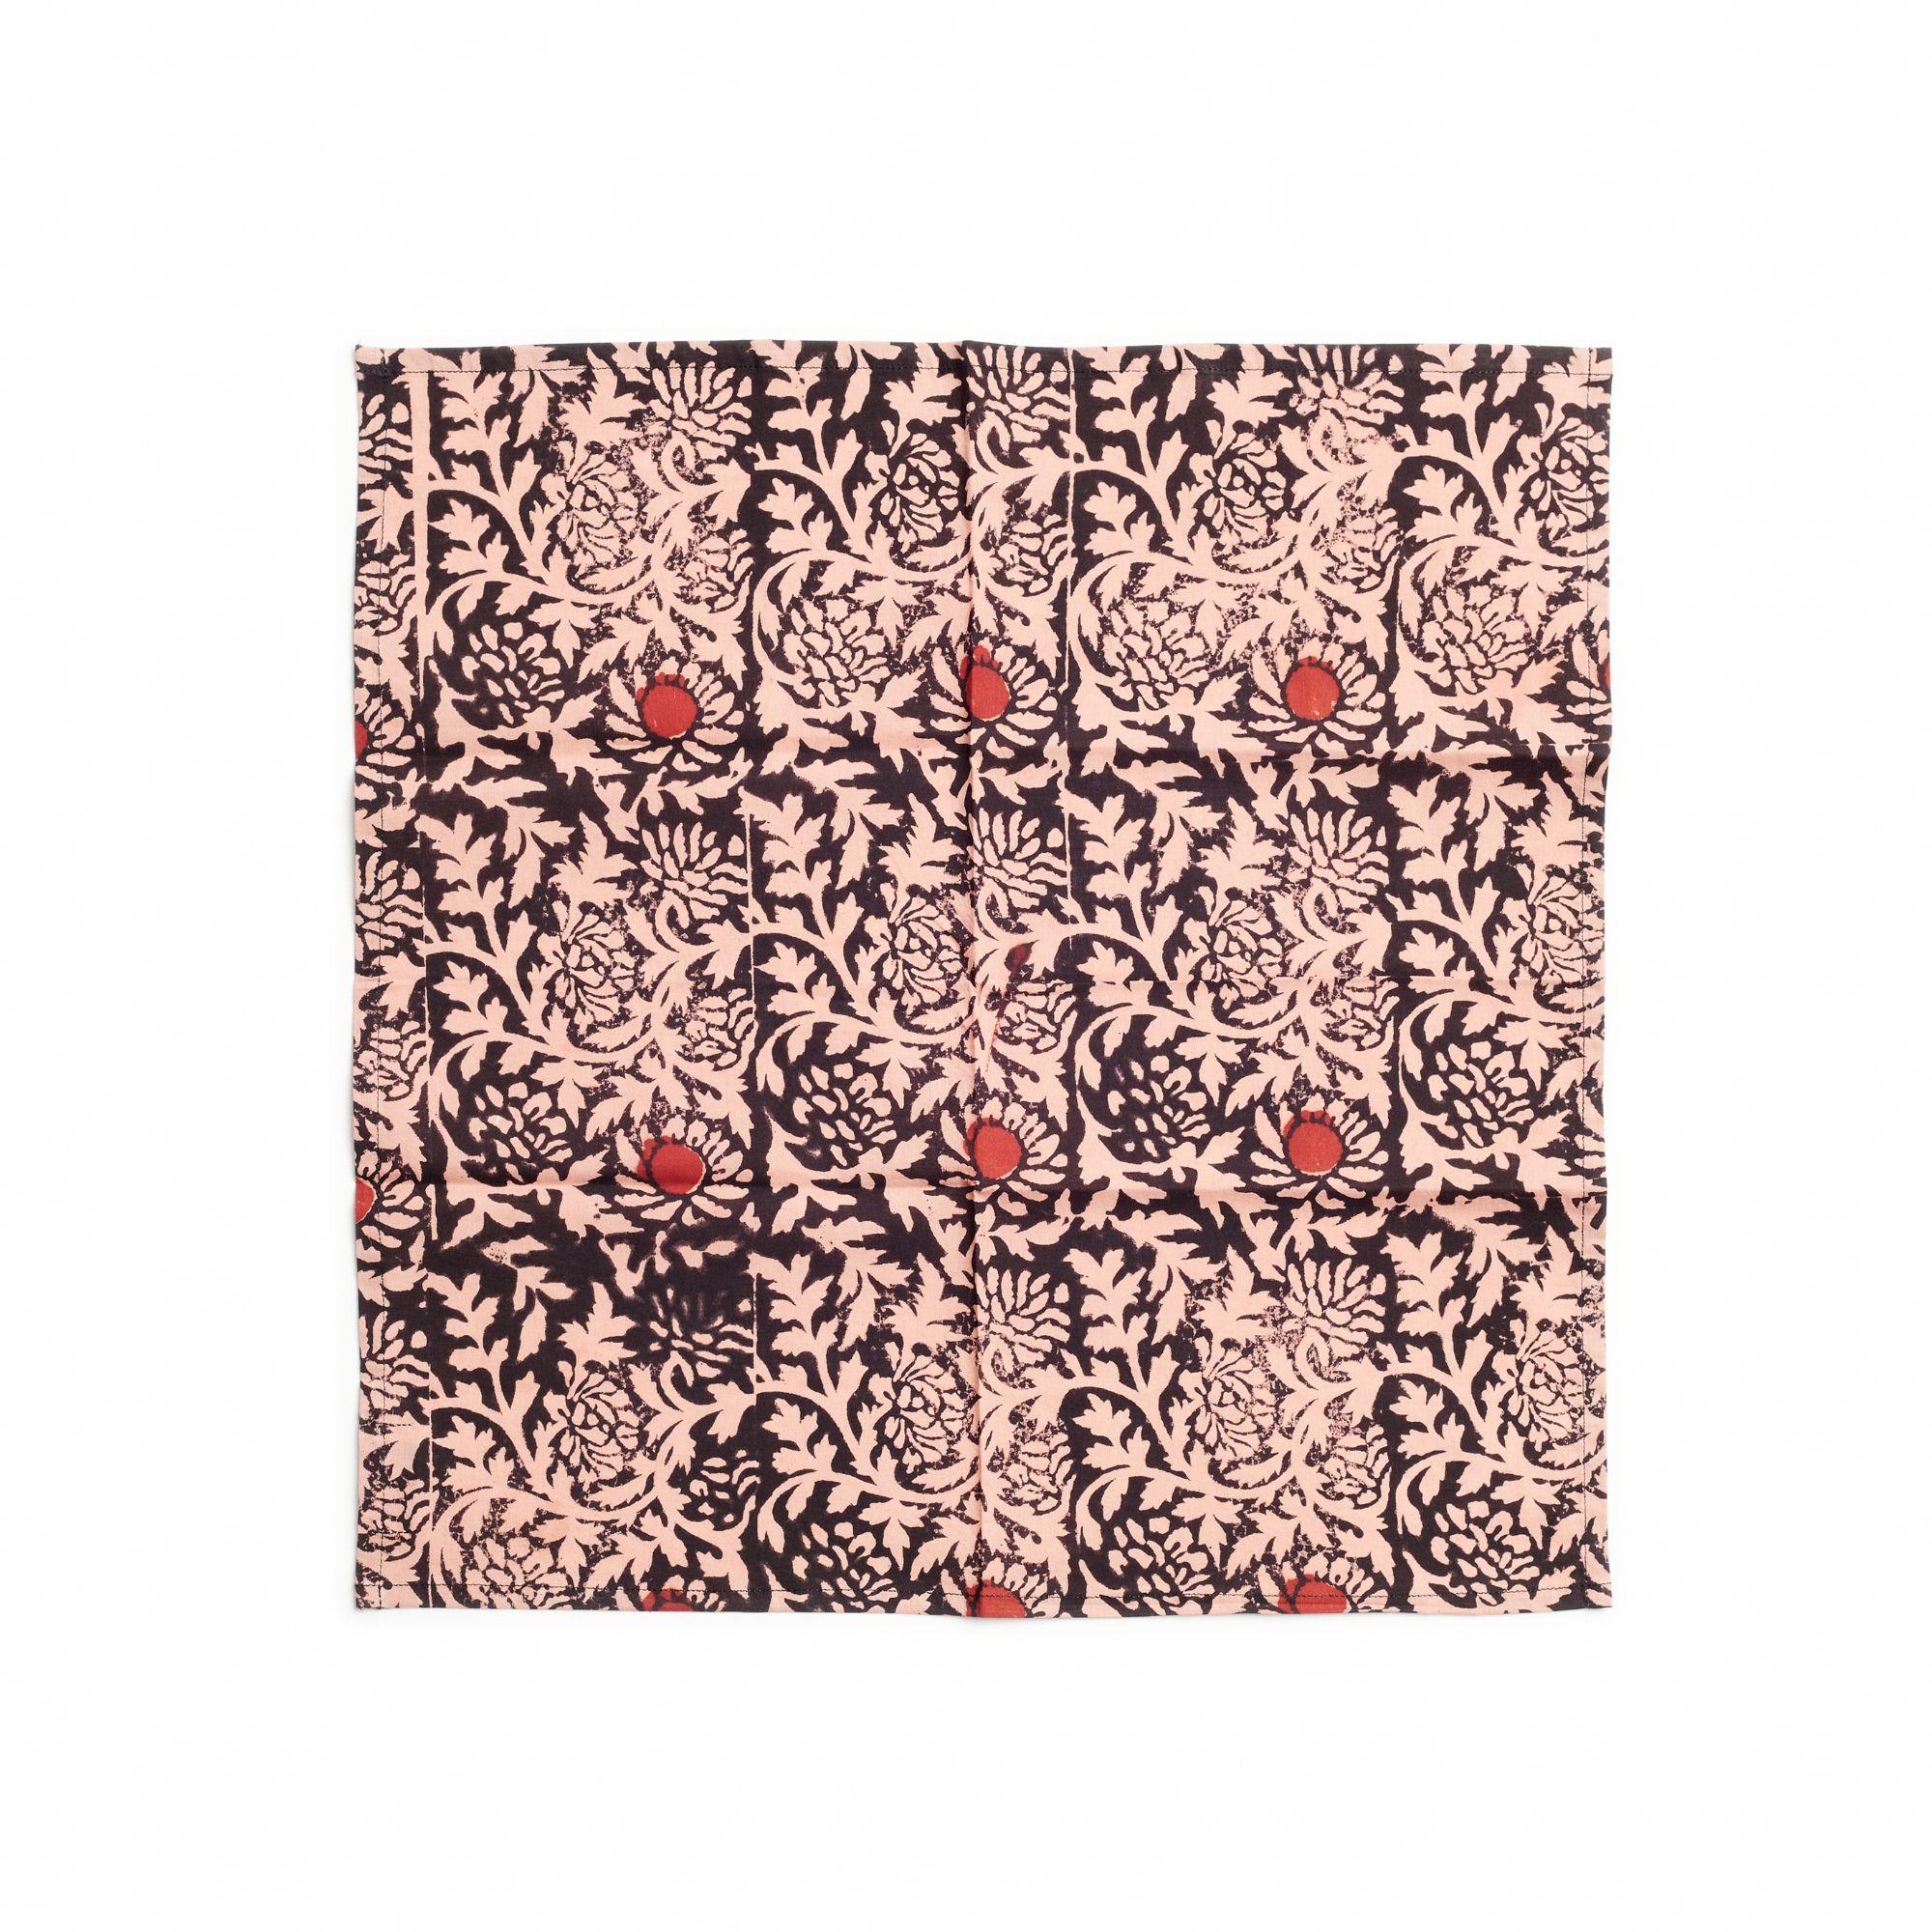 Hummas floral table napkin is a unique artisanal napkin. Created artistically and ethically by artisans in India using block print technique, using only pure natural dyes. It is a pure statement piece that adds modern and timeless quality as a table